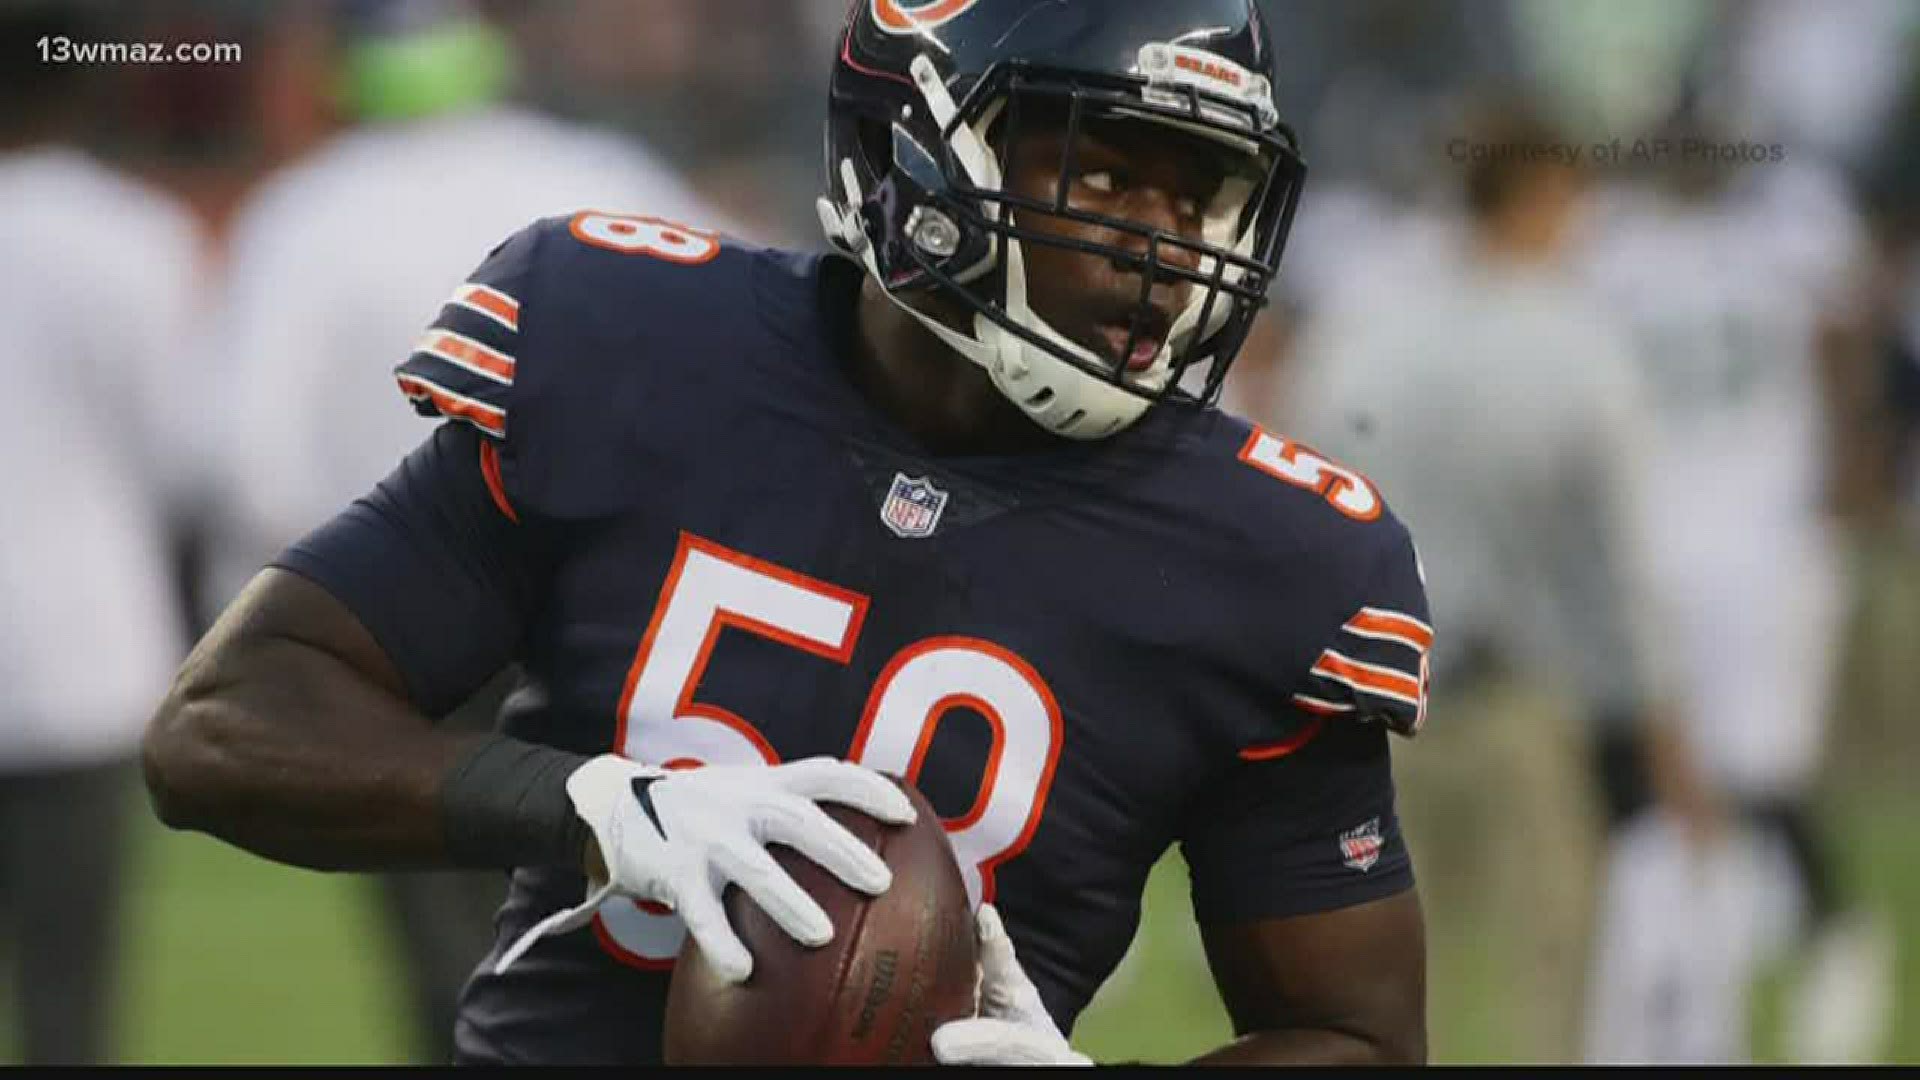 Macon County native, Georgia Bulldog legend Roquan Smith is dealing with social distancing and life in the coronavirus pandemic as a member of the Chicago Bears.